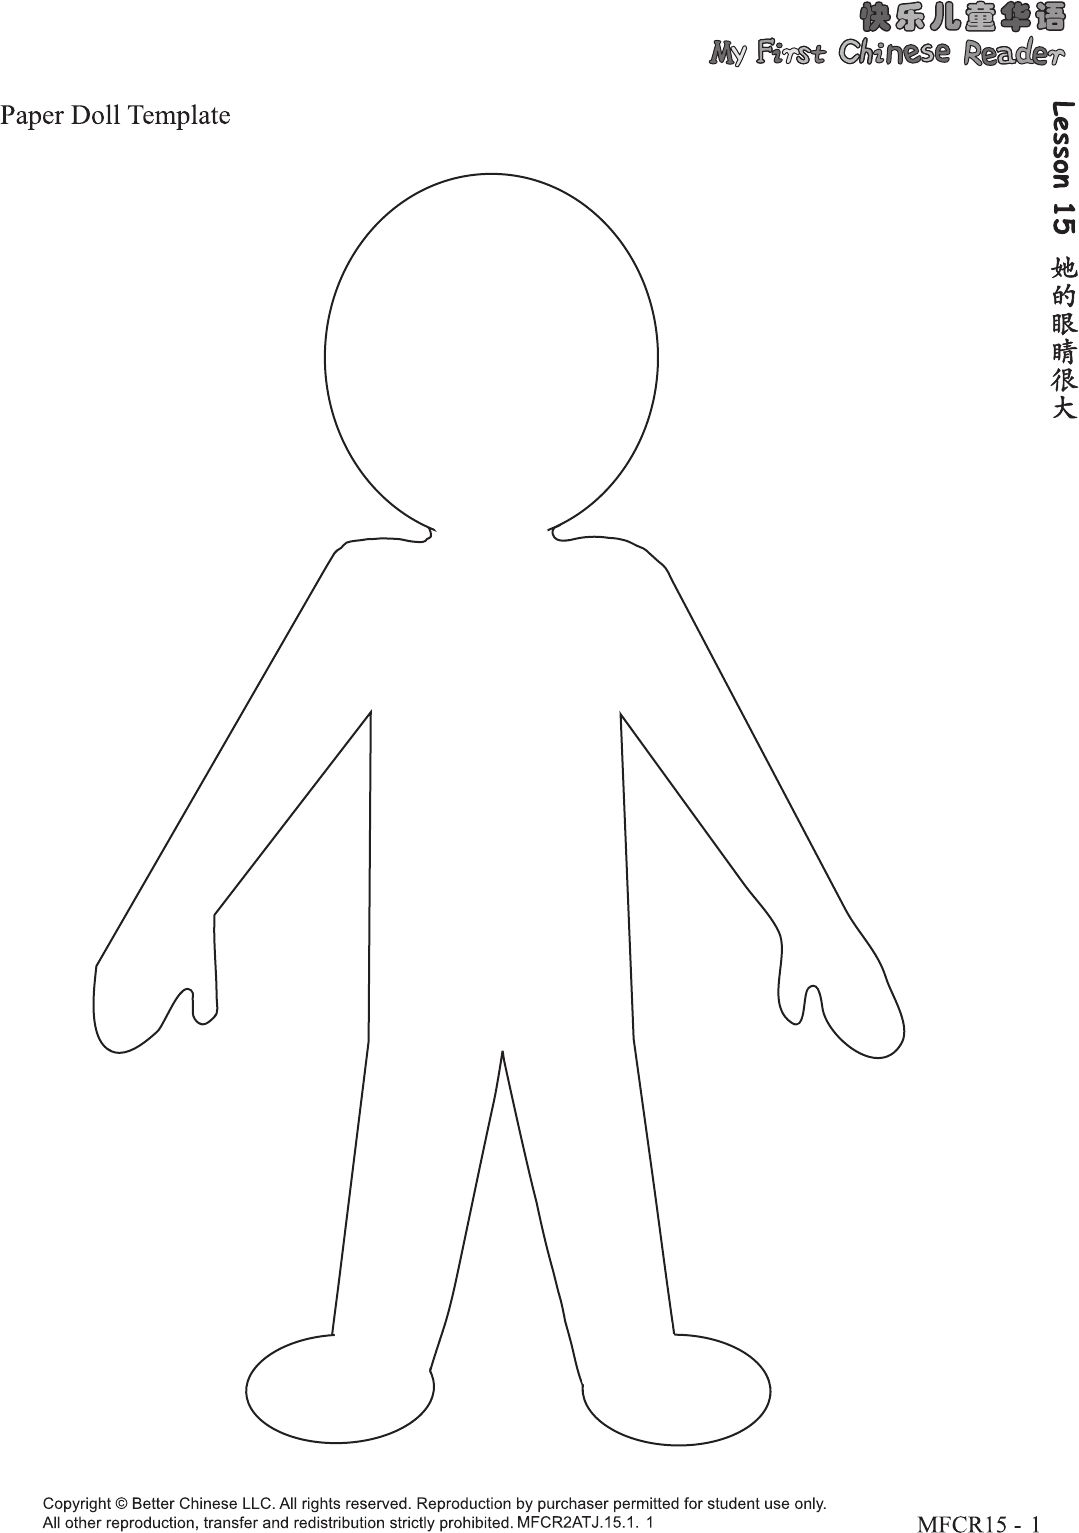 free-printable-paper-doll-template-printable-templates